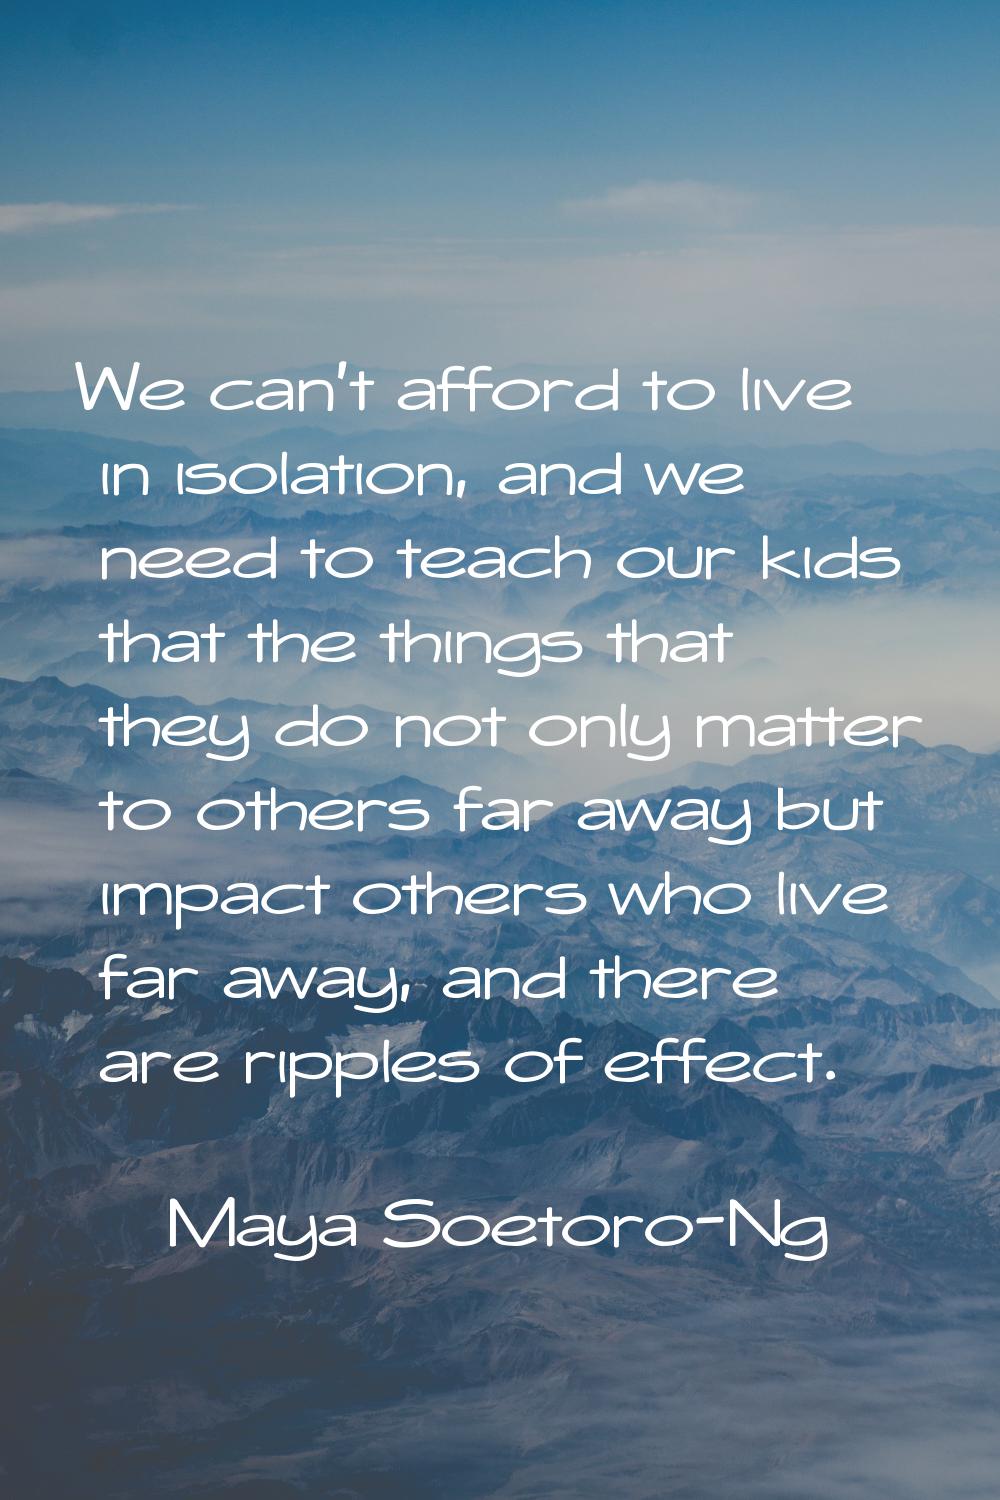 We can't afford to live in isolation, and we need to teach our kids that the things that they do no